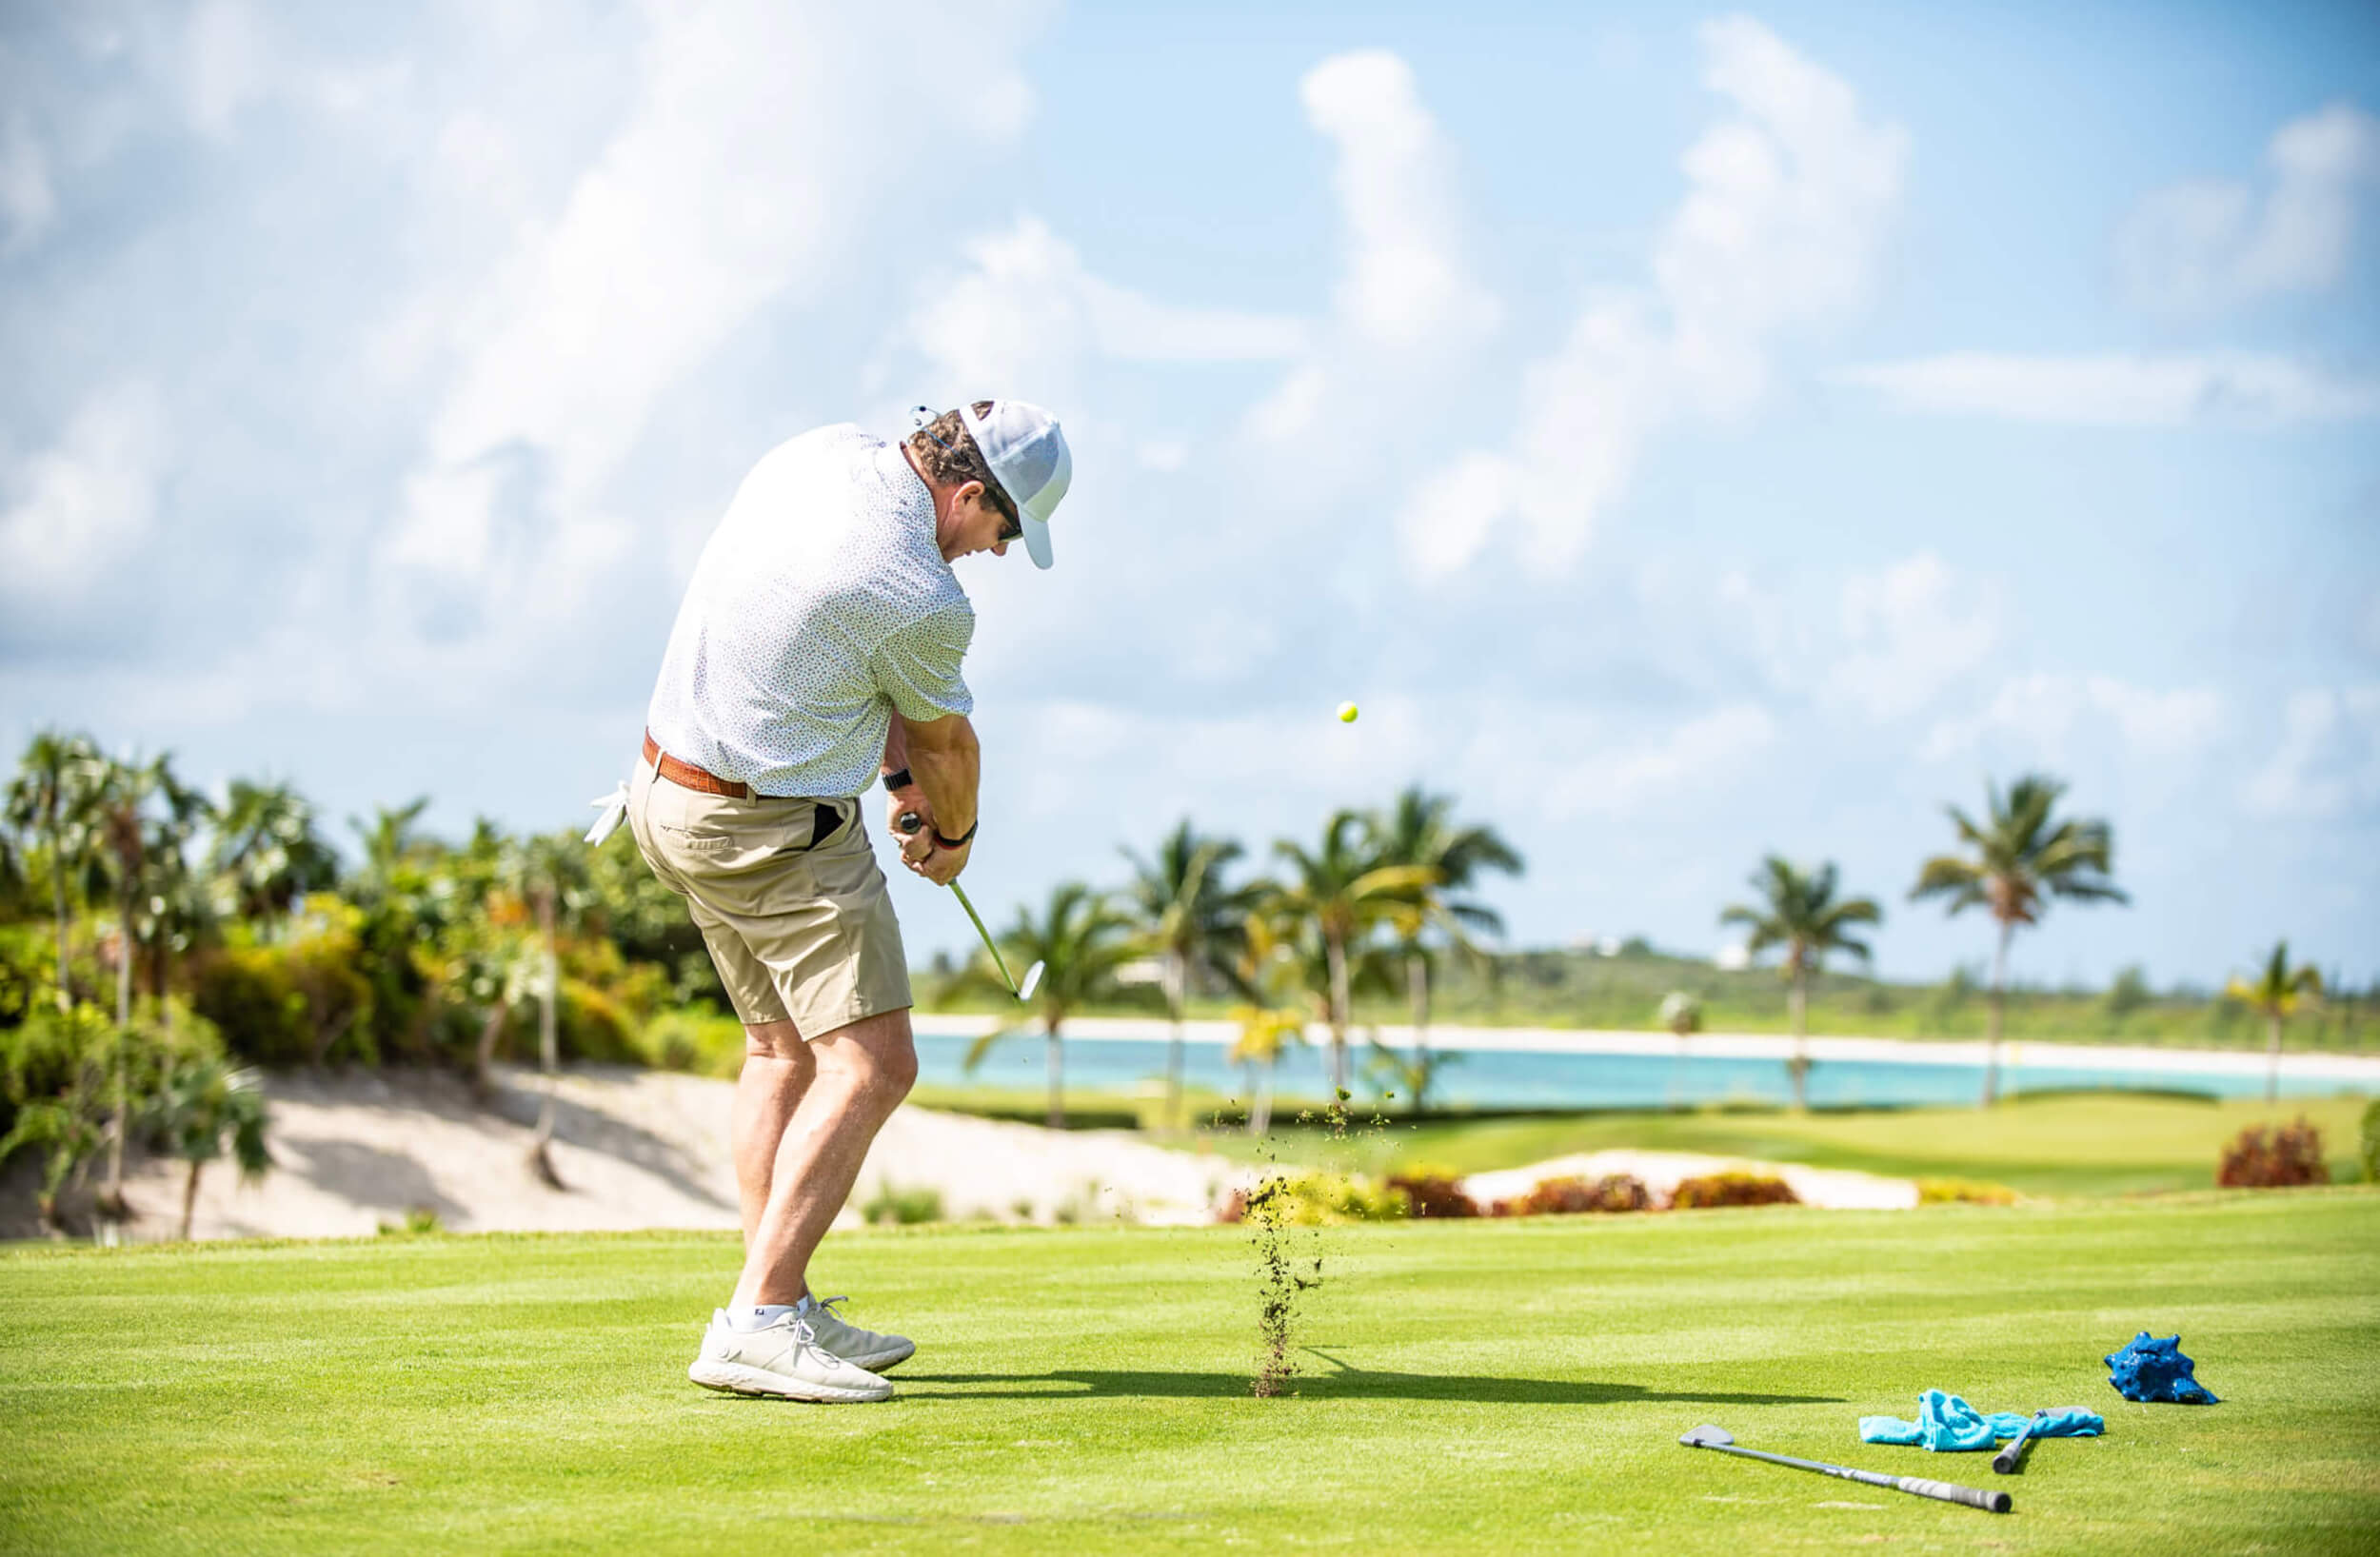 Golfer in action at The Abaco Club Golf Course